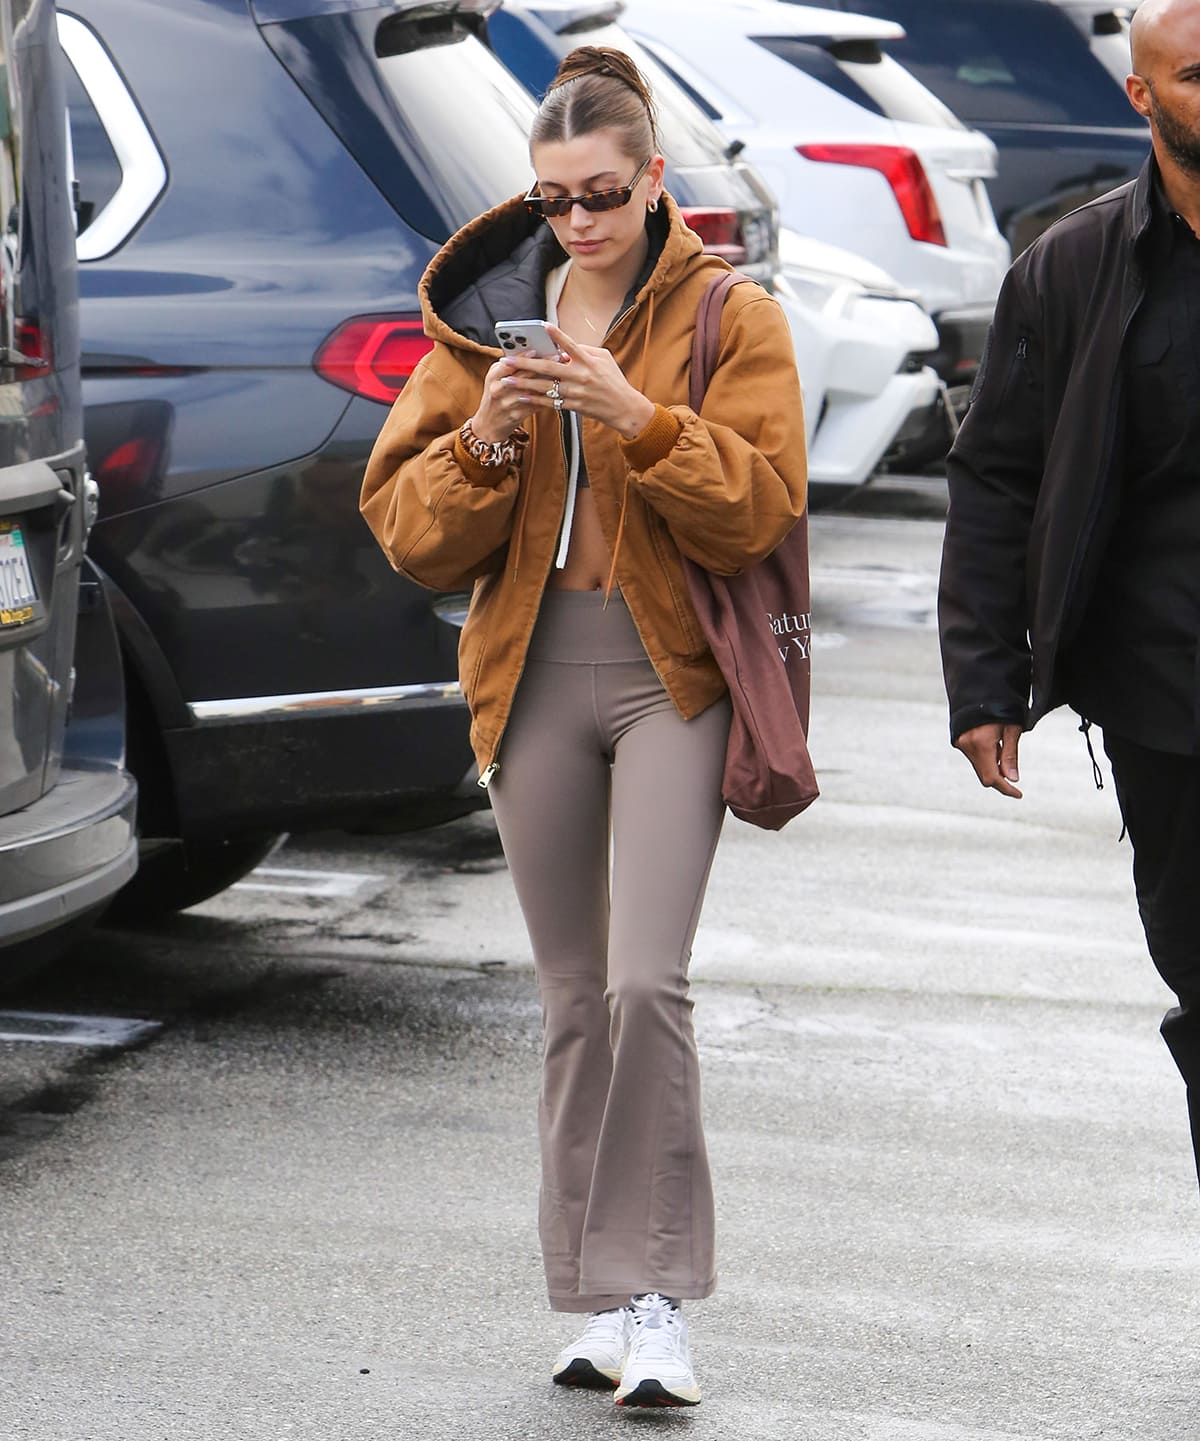 Hailey Bieber opts for a neutral Pilates outfit with TnAction TnaBUTTER bra top and leggings and R13 oversized workwear bomber jacket